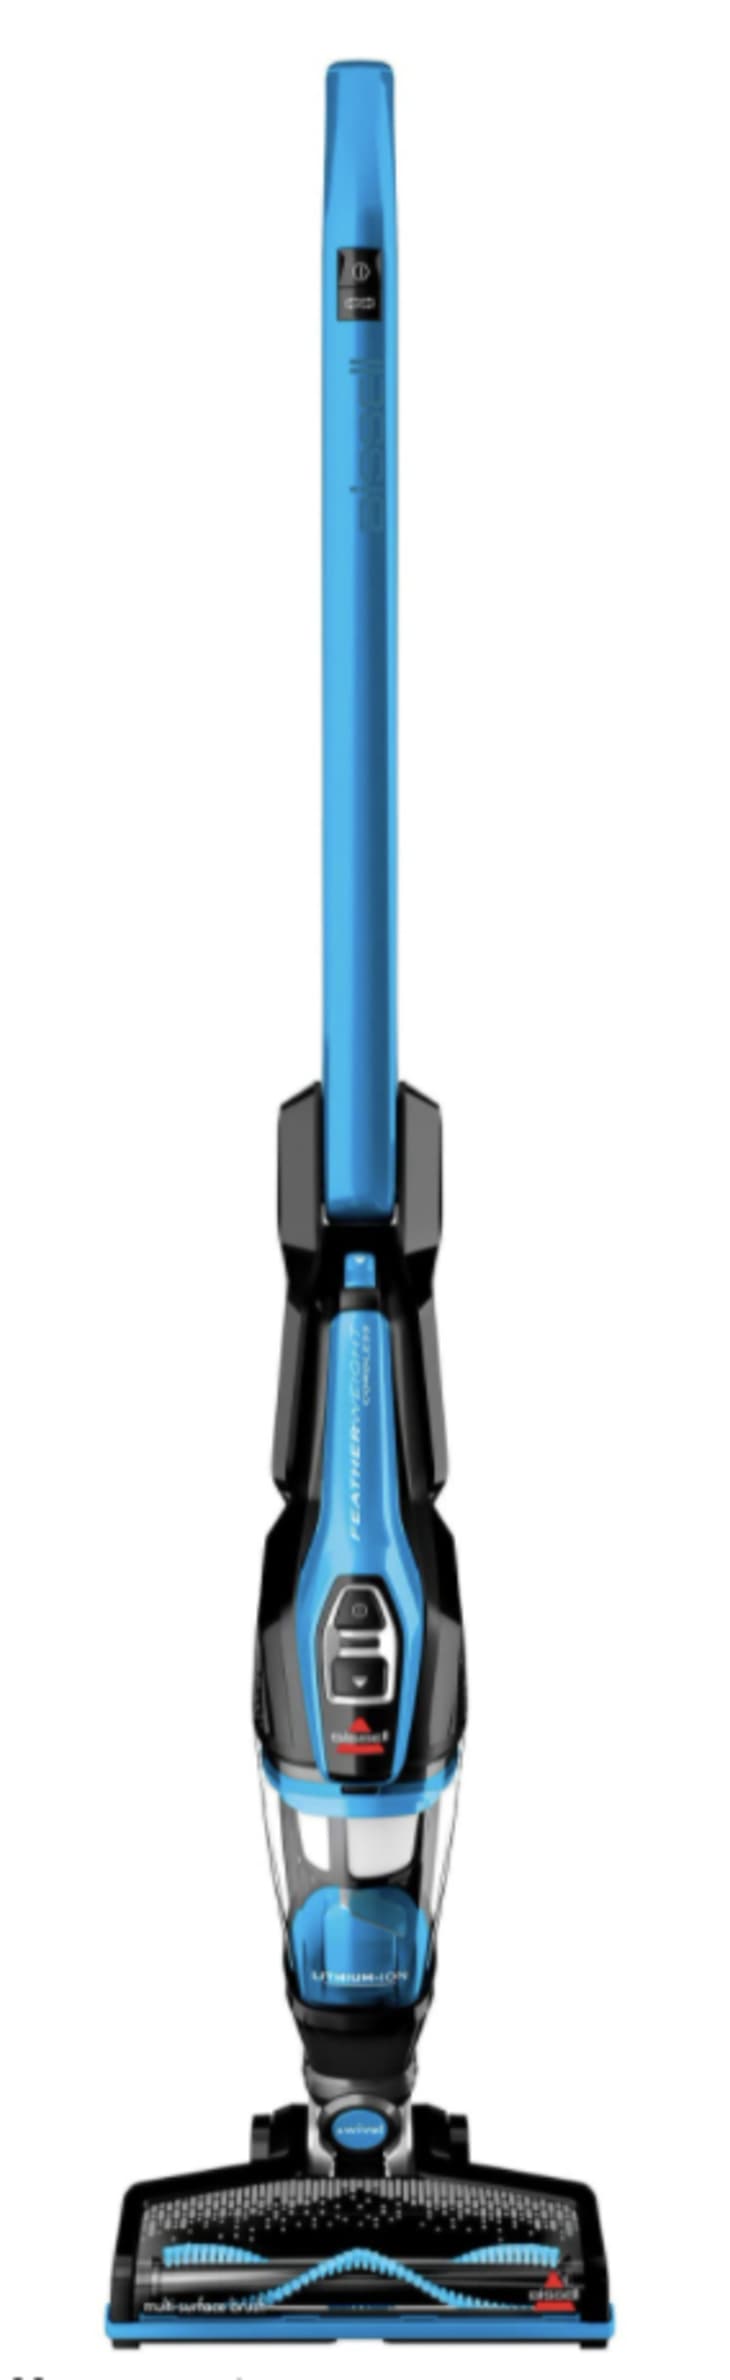 Product Image: BISSELL 3061 Featherweight Cordless Stick Vacuum